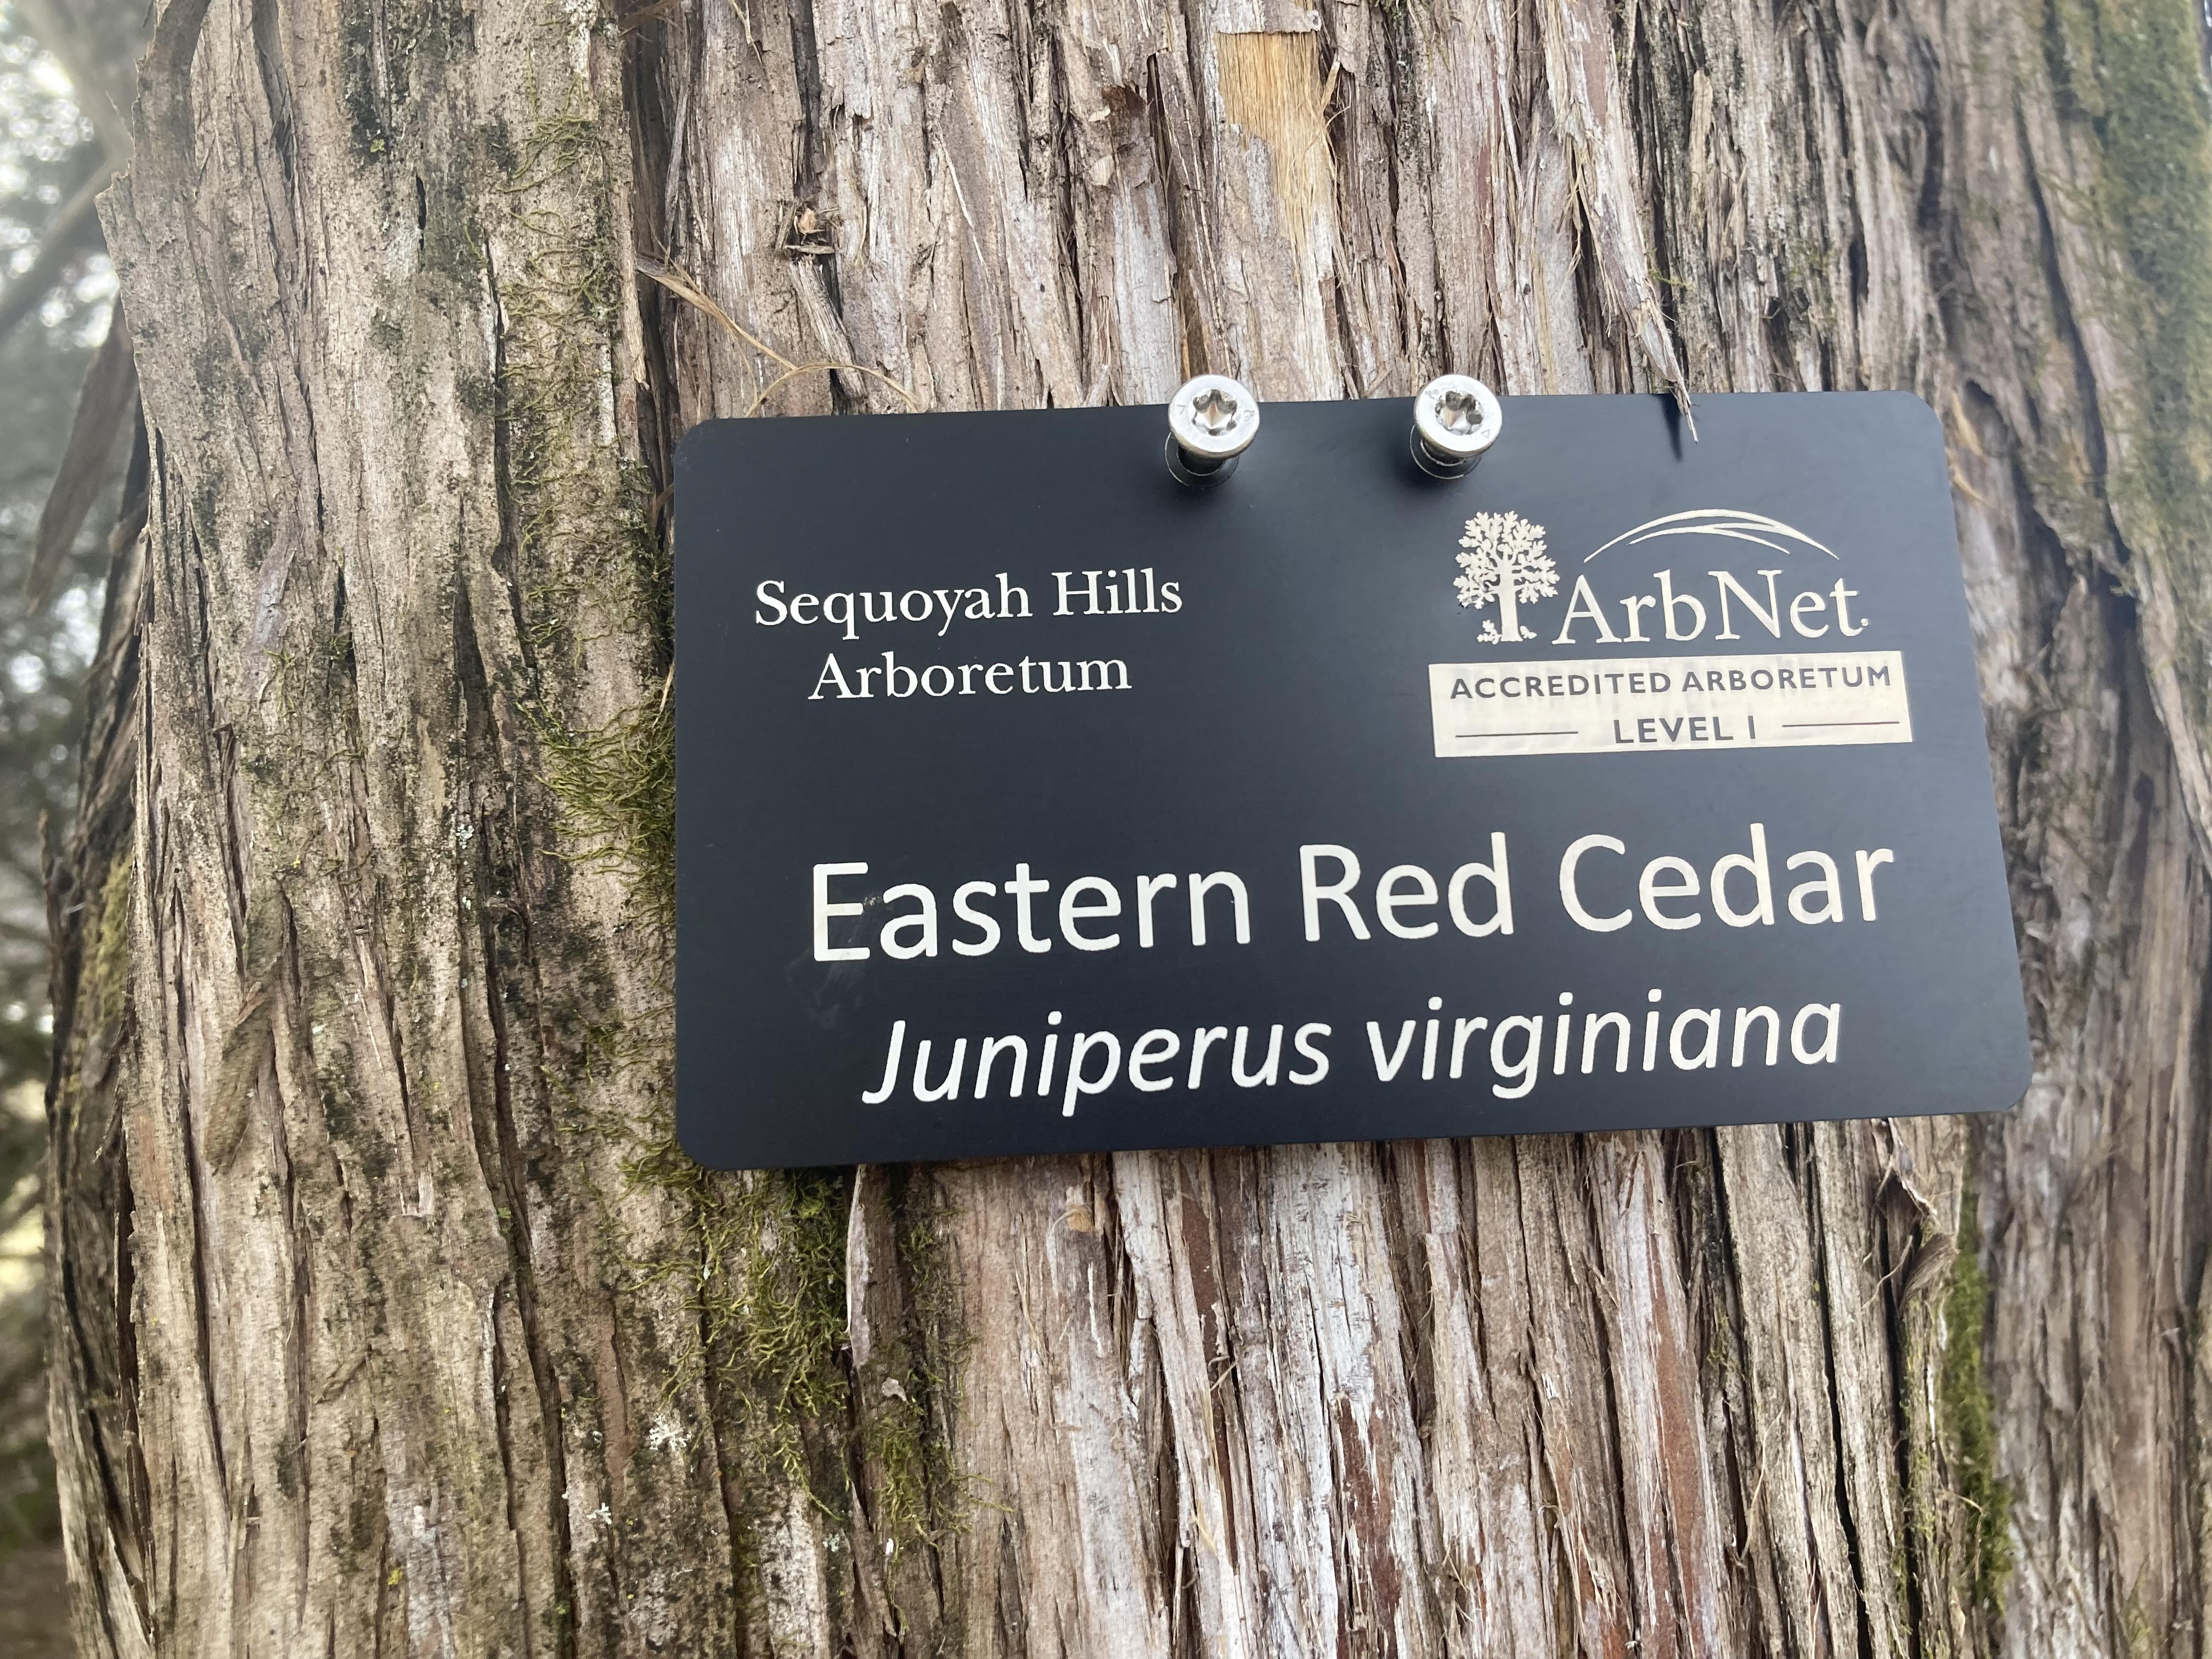 Sequoyah Hills Arboretum sign identifying the Eastern Red Cedar to which it is attached.